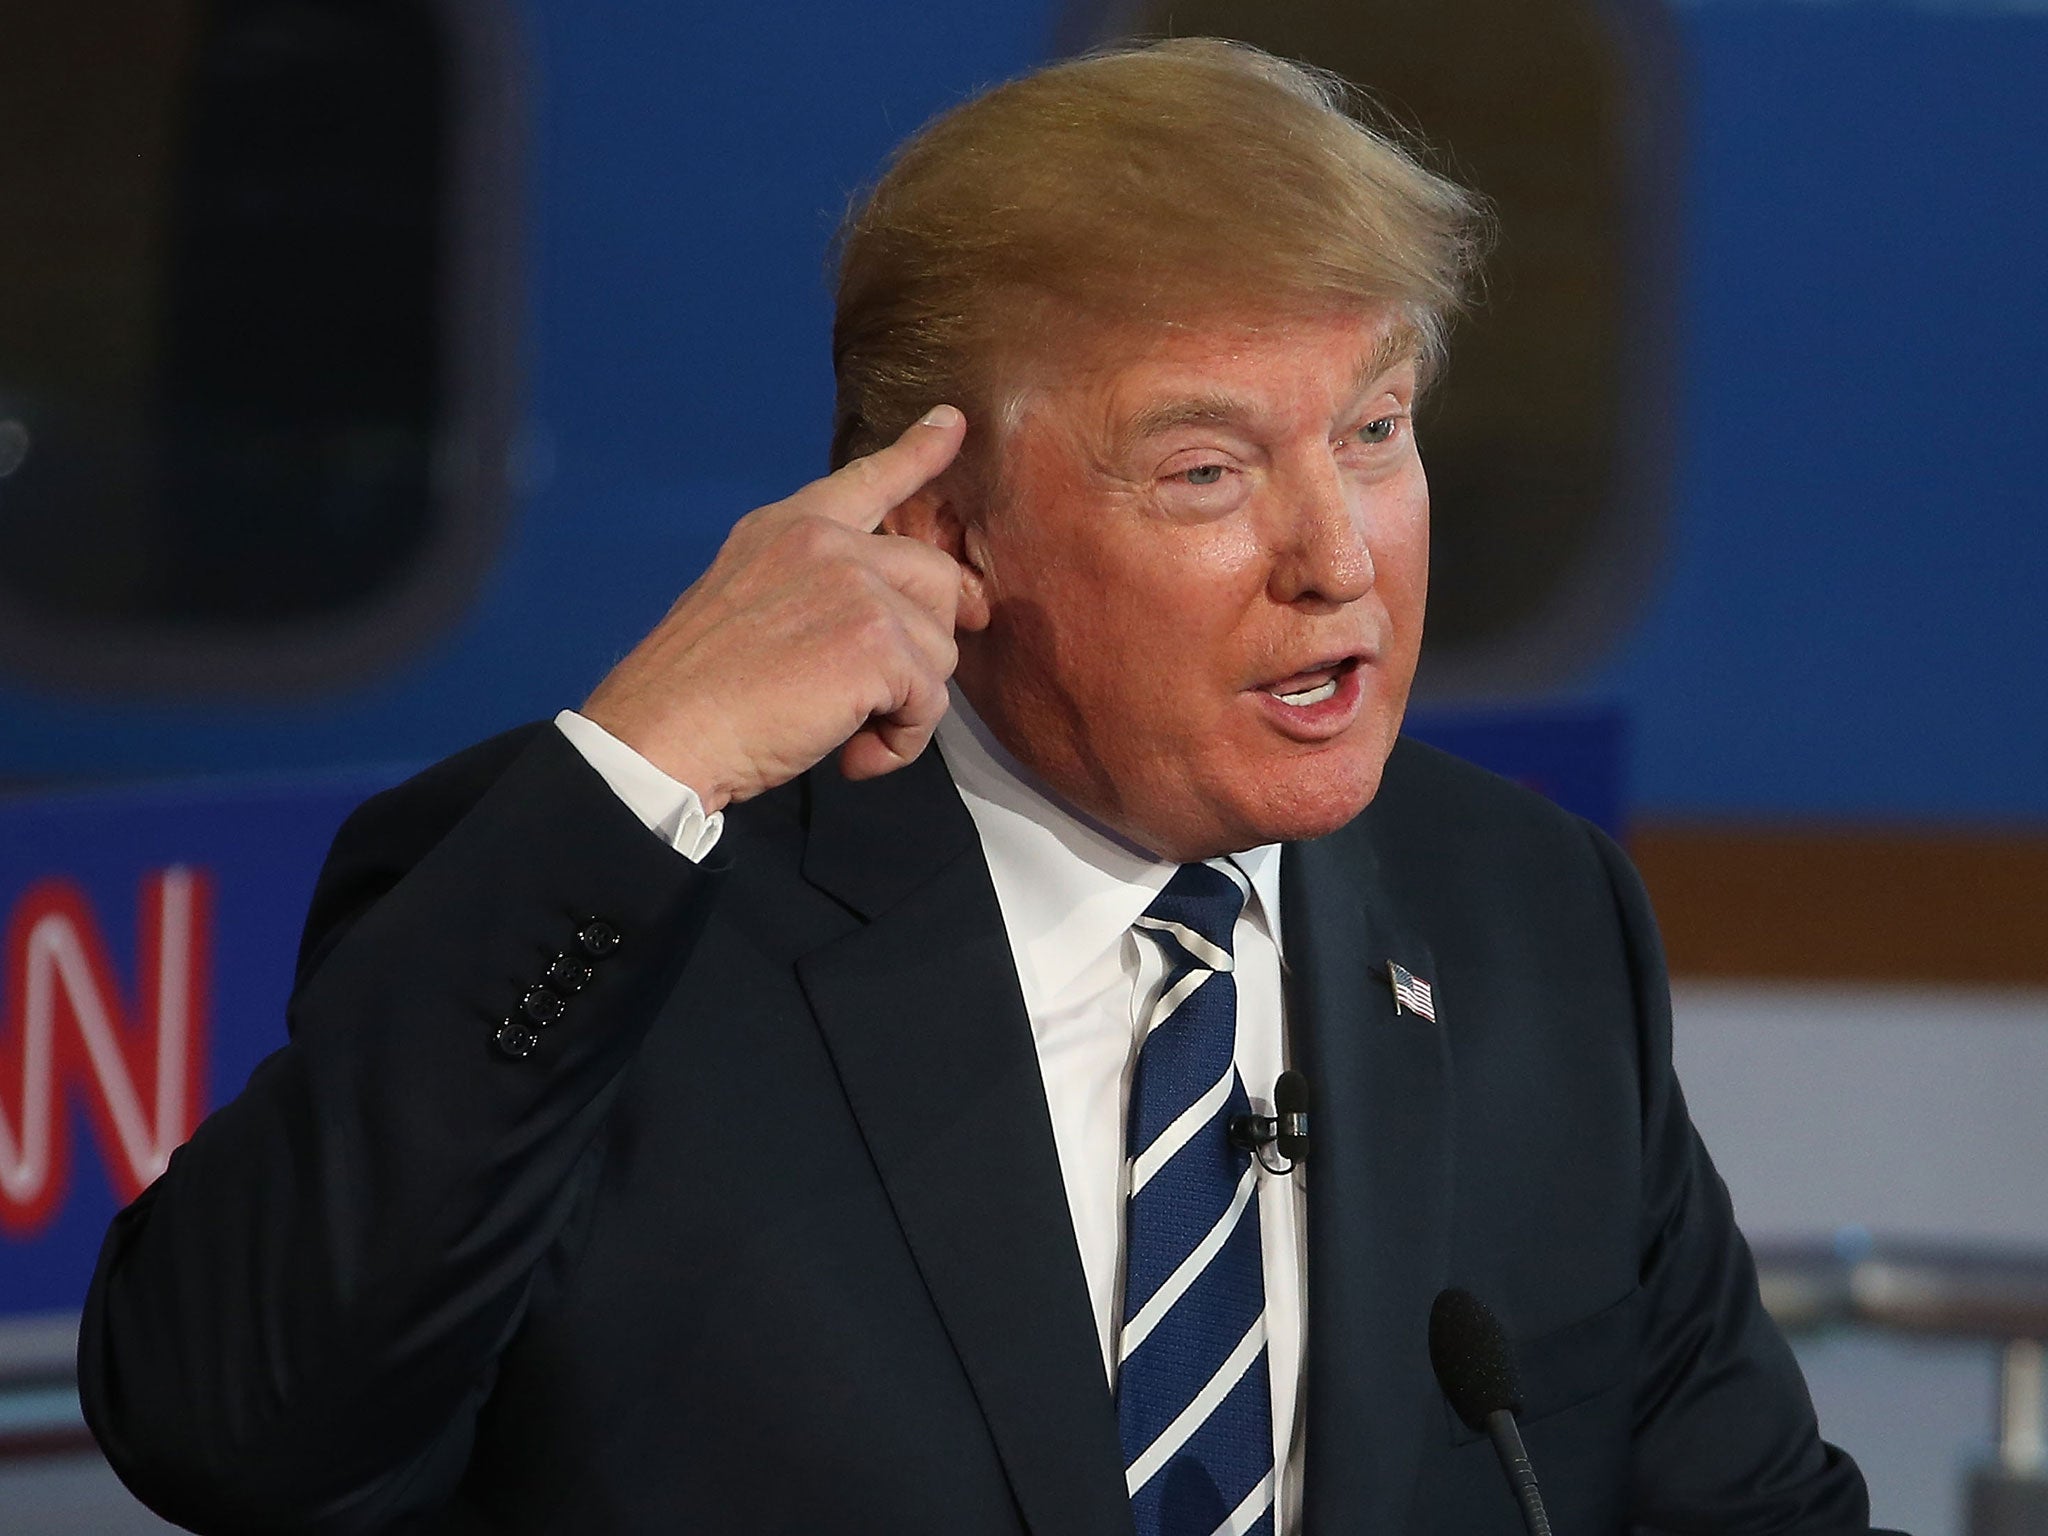 Donald Trump once more dominated the Republican debate in South Carolina